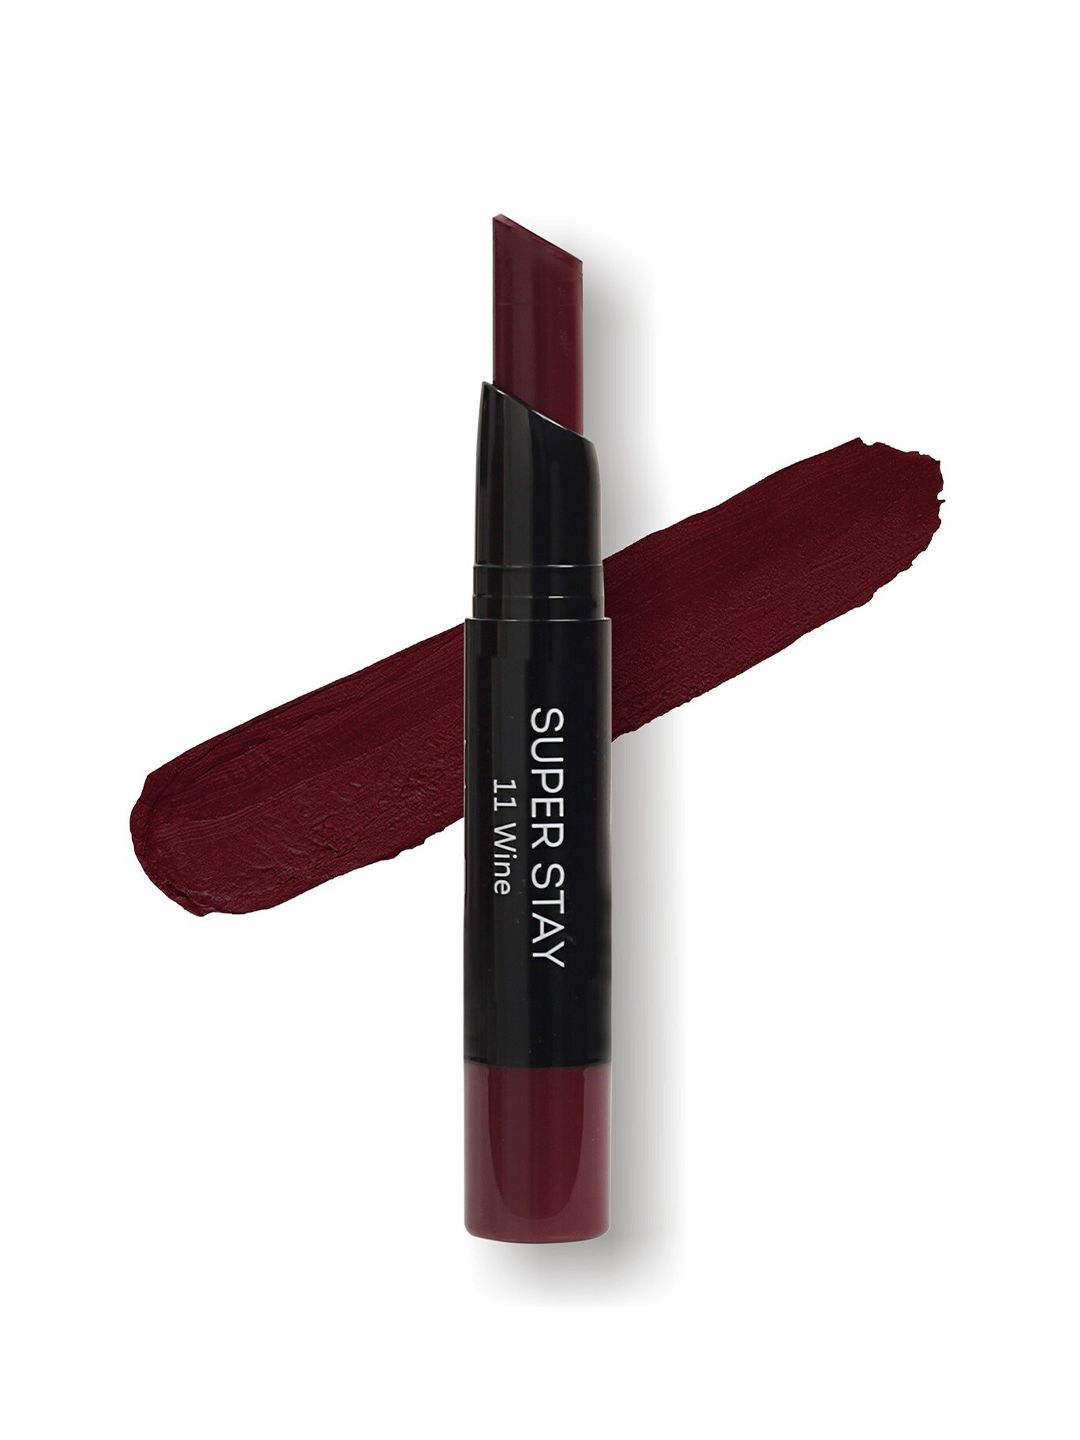 ME-ON Super Stay Lipstick Shade 11 (Wine) Price in India